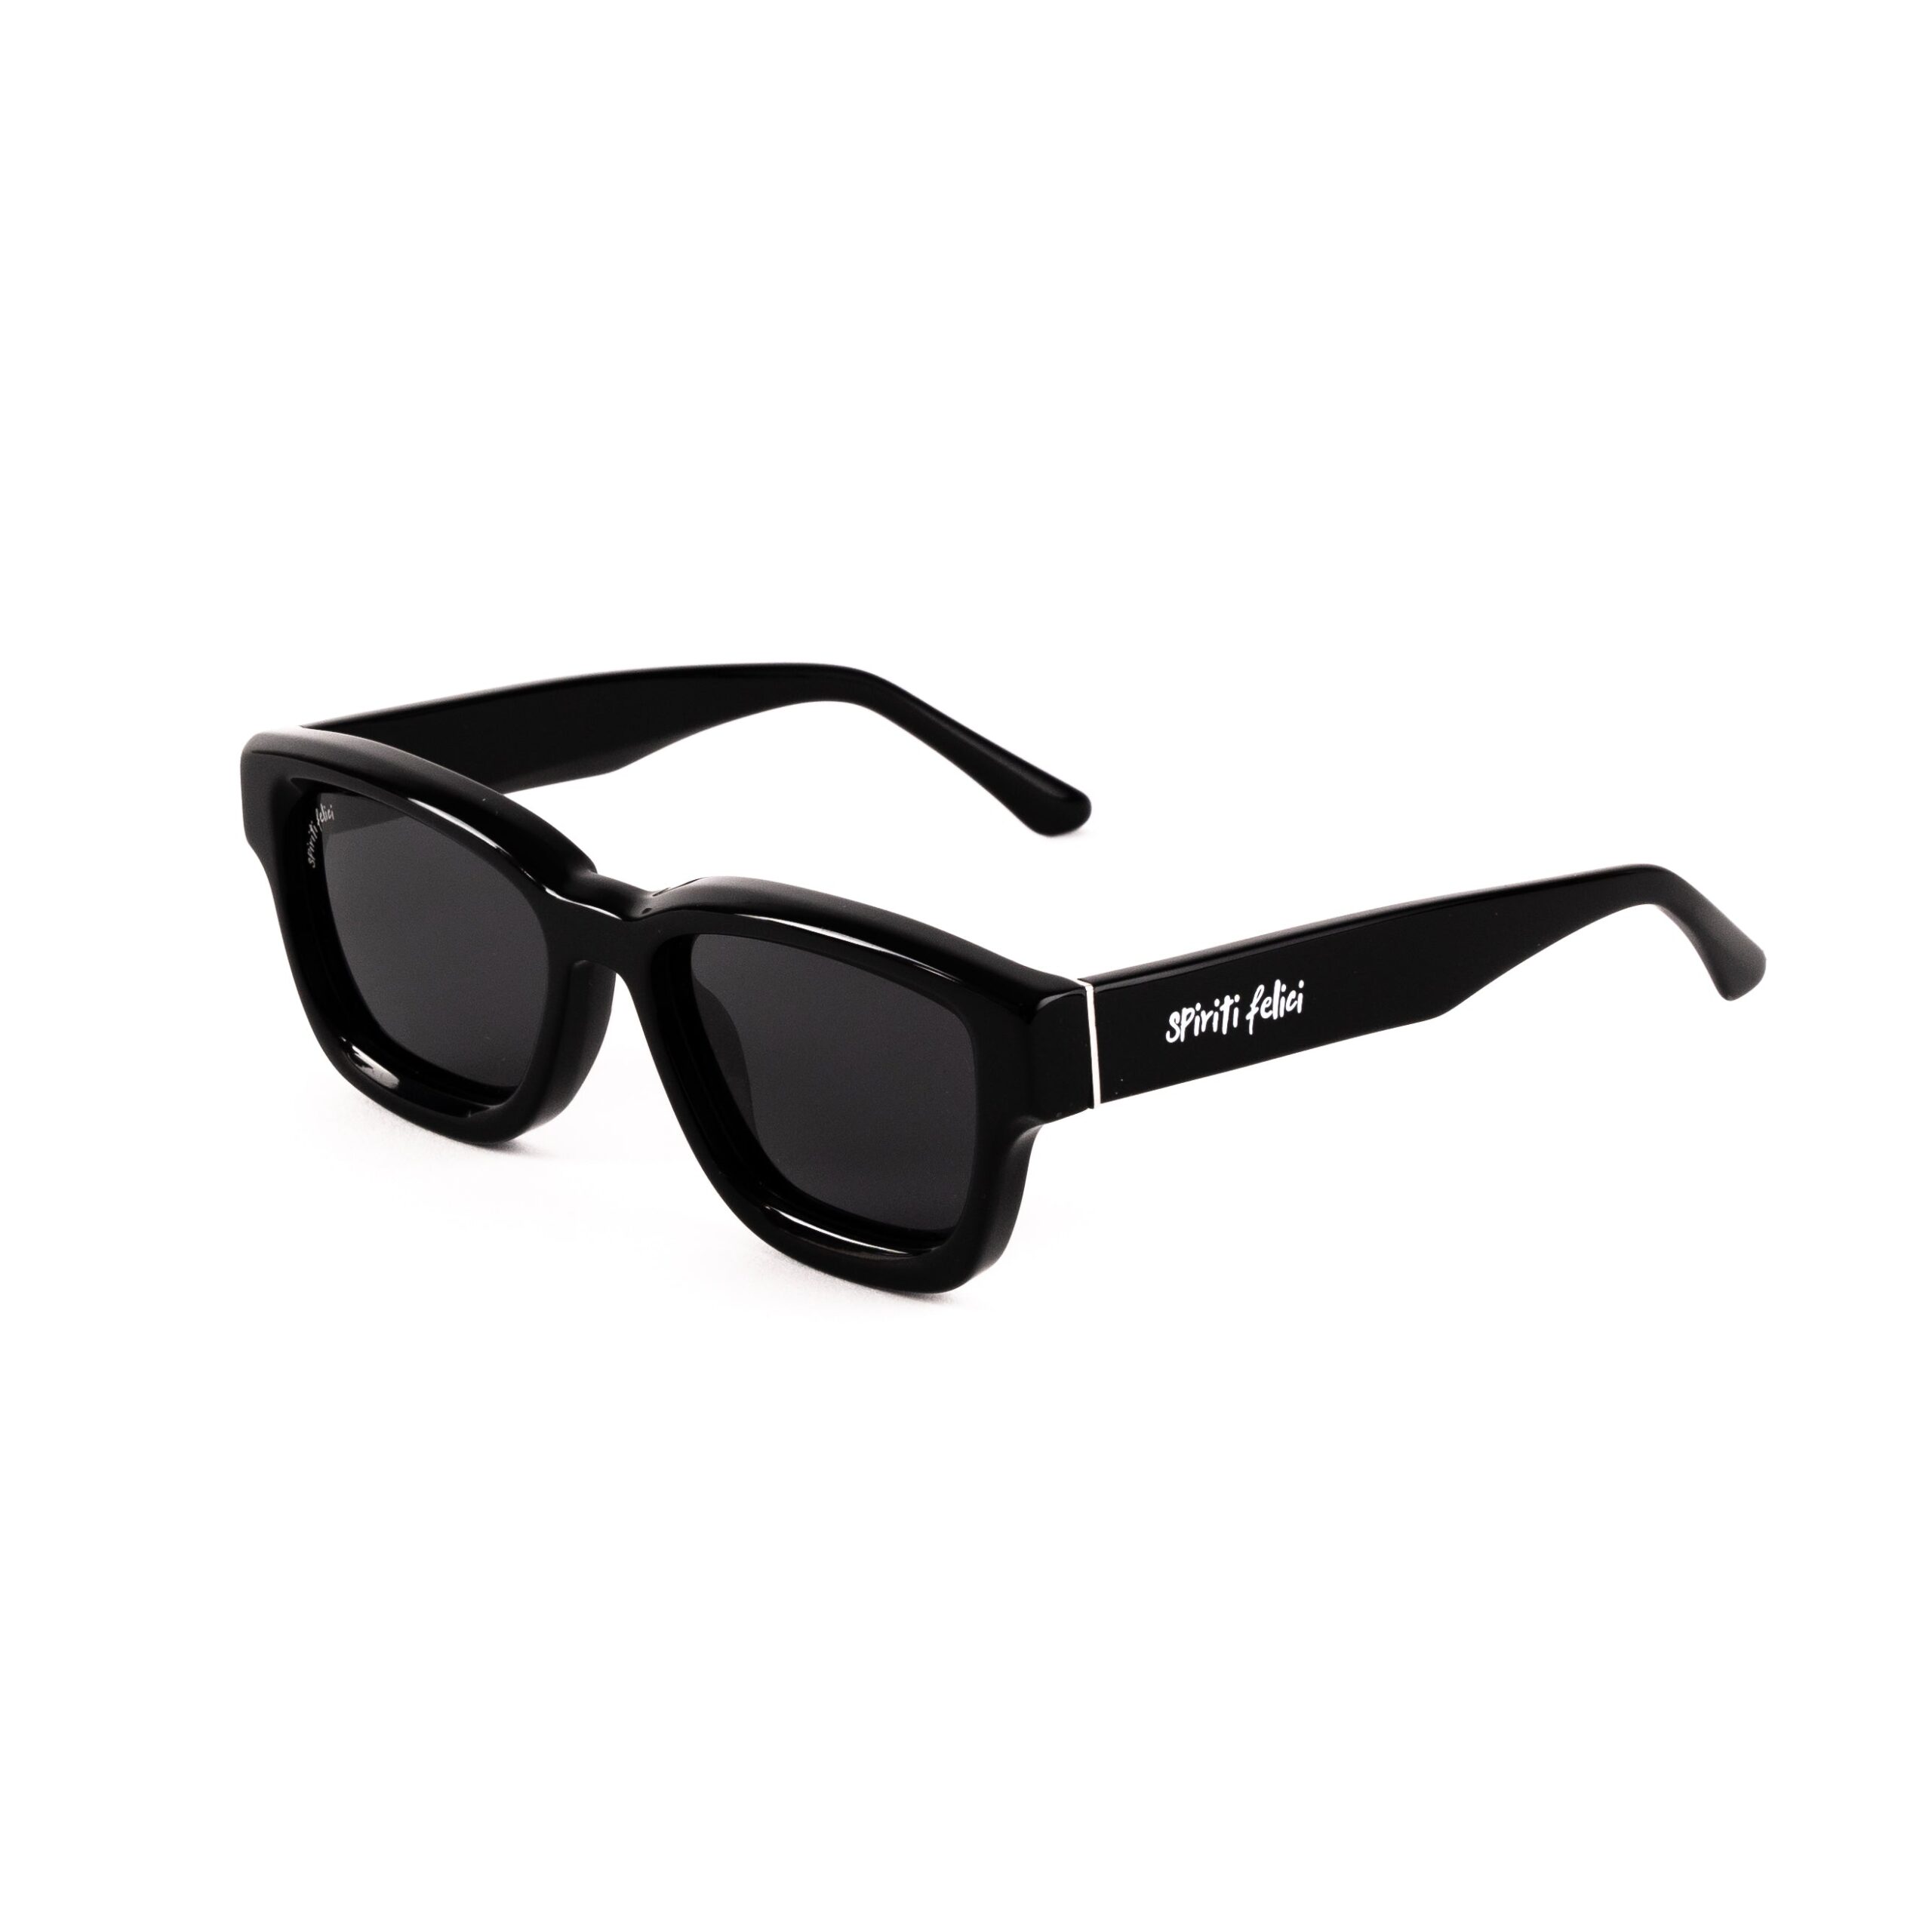 Buy DOMAIN sunglasses from Spiriti Felici available online at VEND. Explore more product category collections now